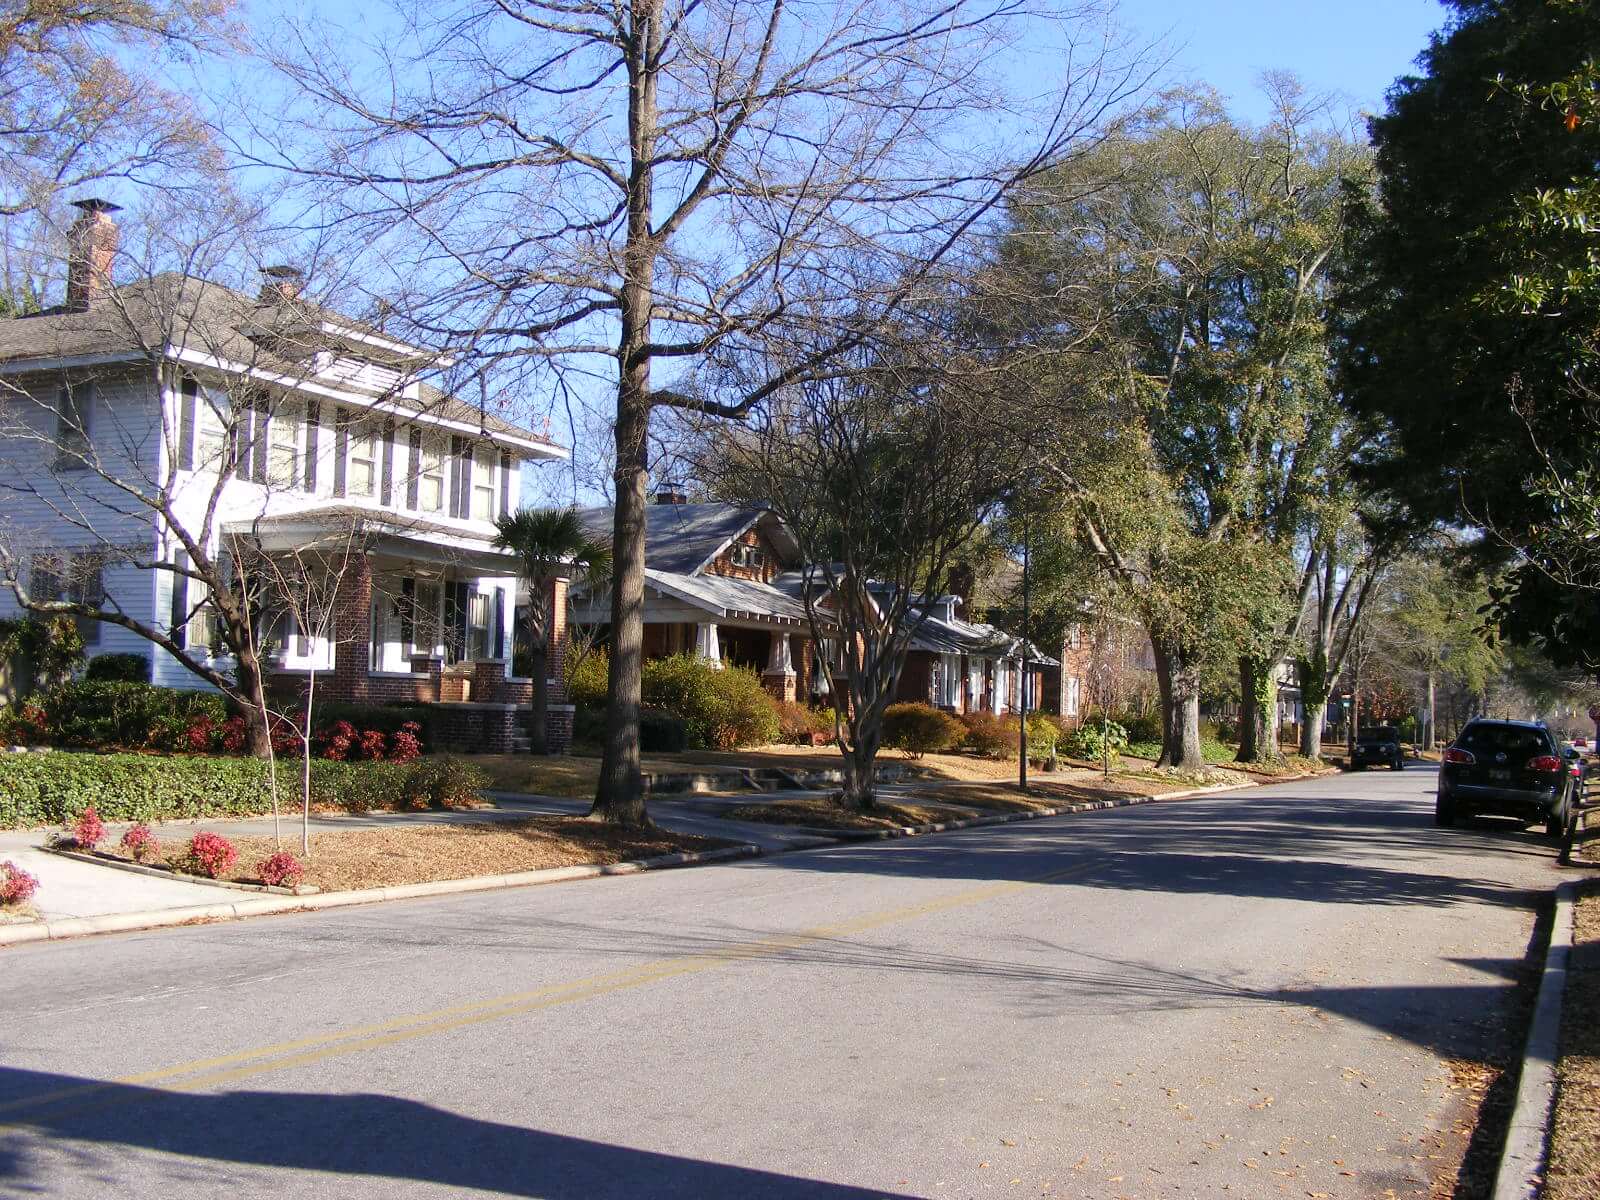 Photograph of a street with one and two story wood-sided and brick homes